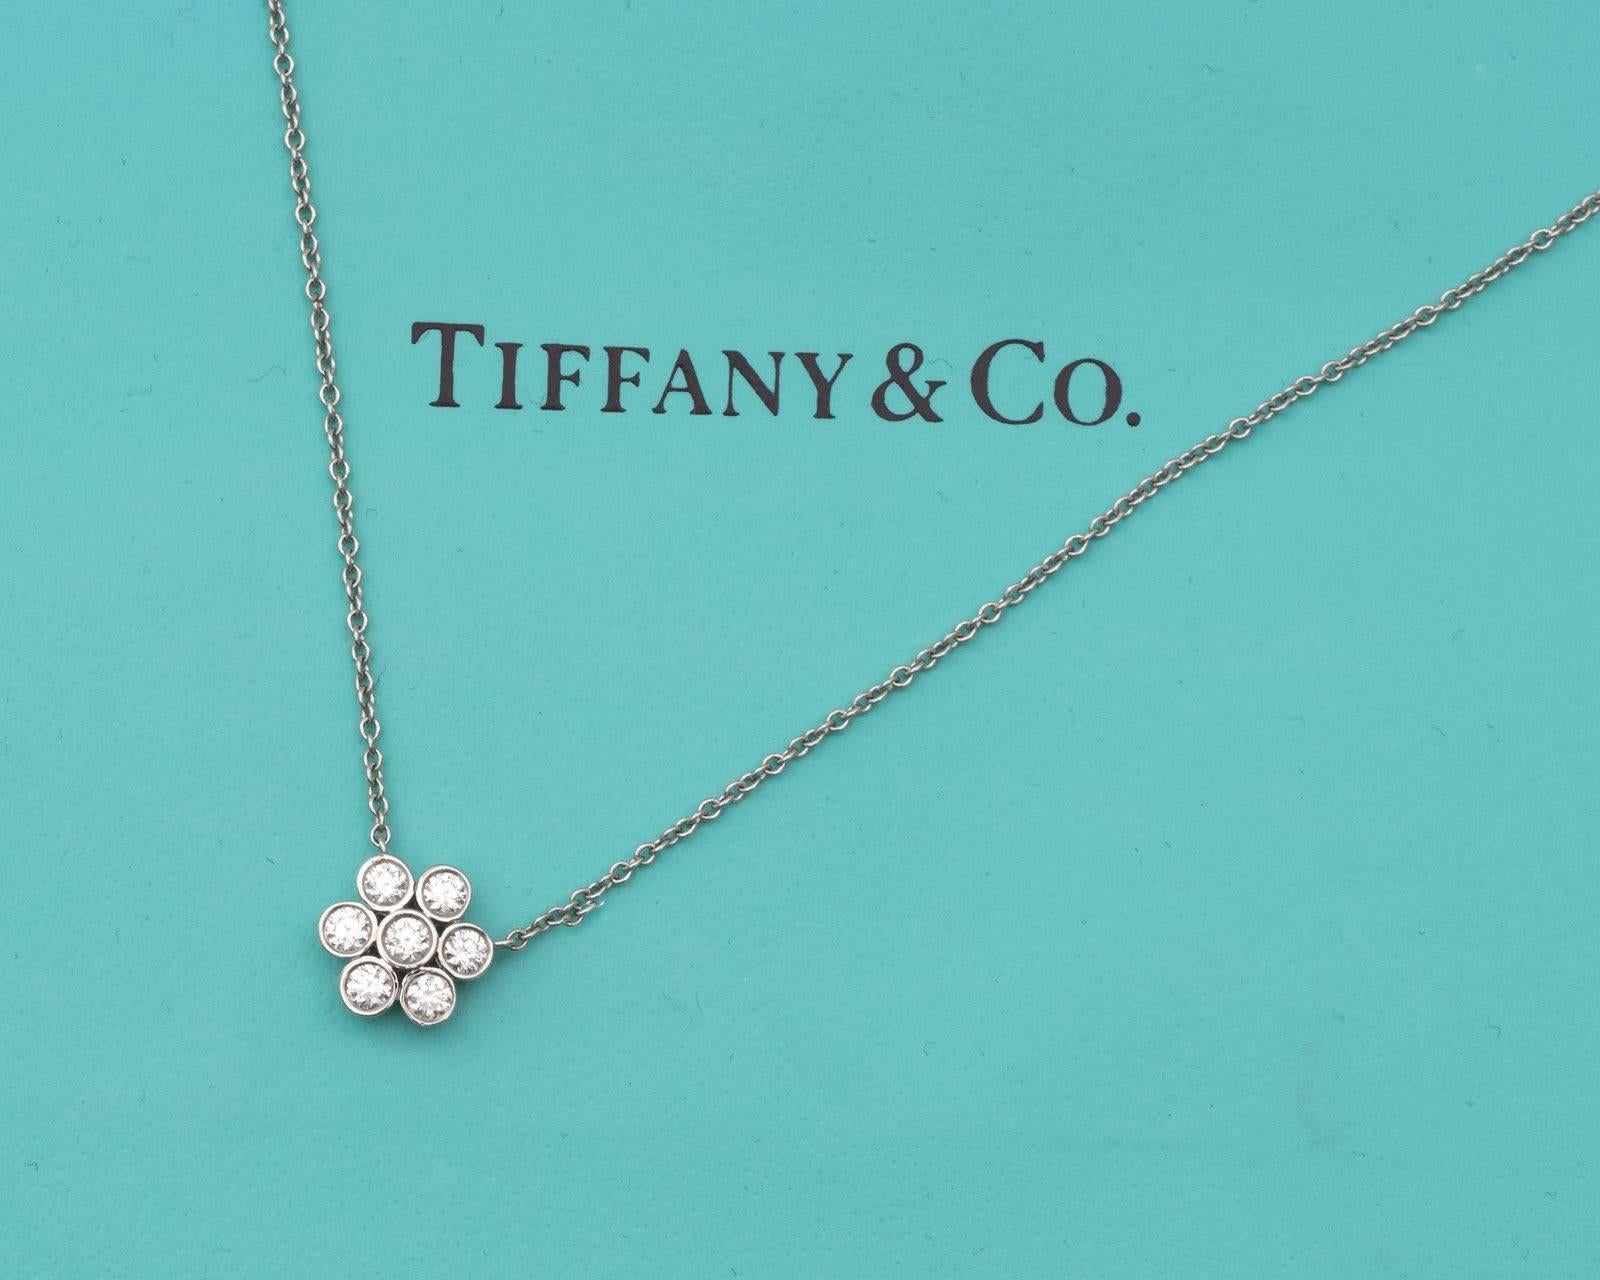 Tiffany and Co. Enchant Flower Pendant crafted in Platinum and Diamonds

This 0.60 carat total weight diamond necklace was originally part of the Tiffany & Co. Enchant collection. 
The seven diamonds sparkle and shine! This 16 inch necklace is ideal